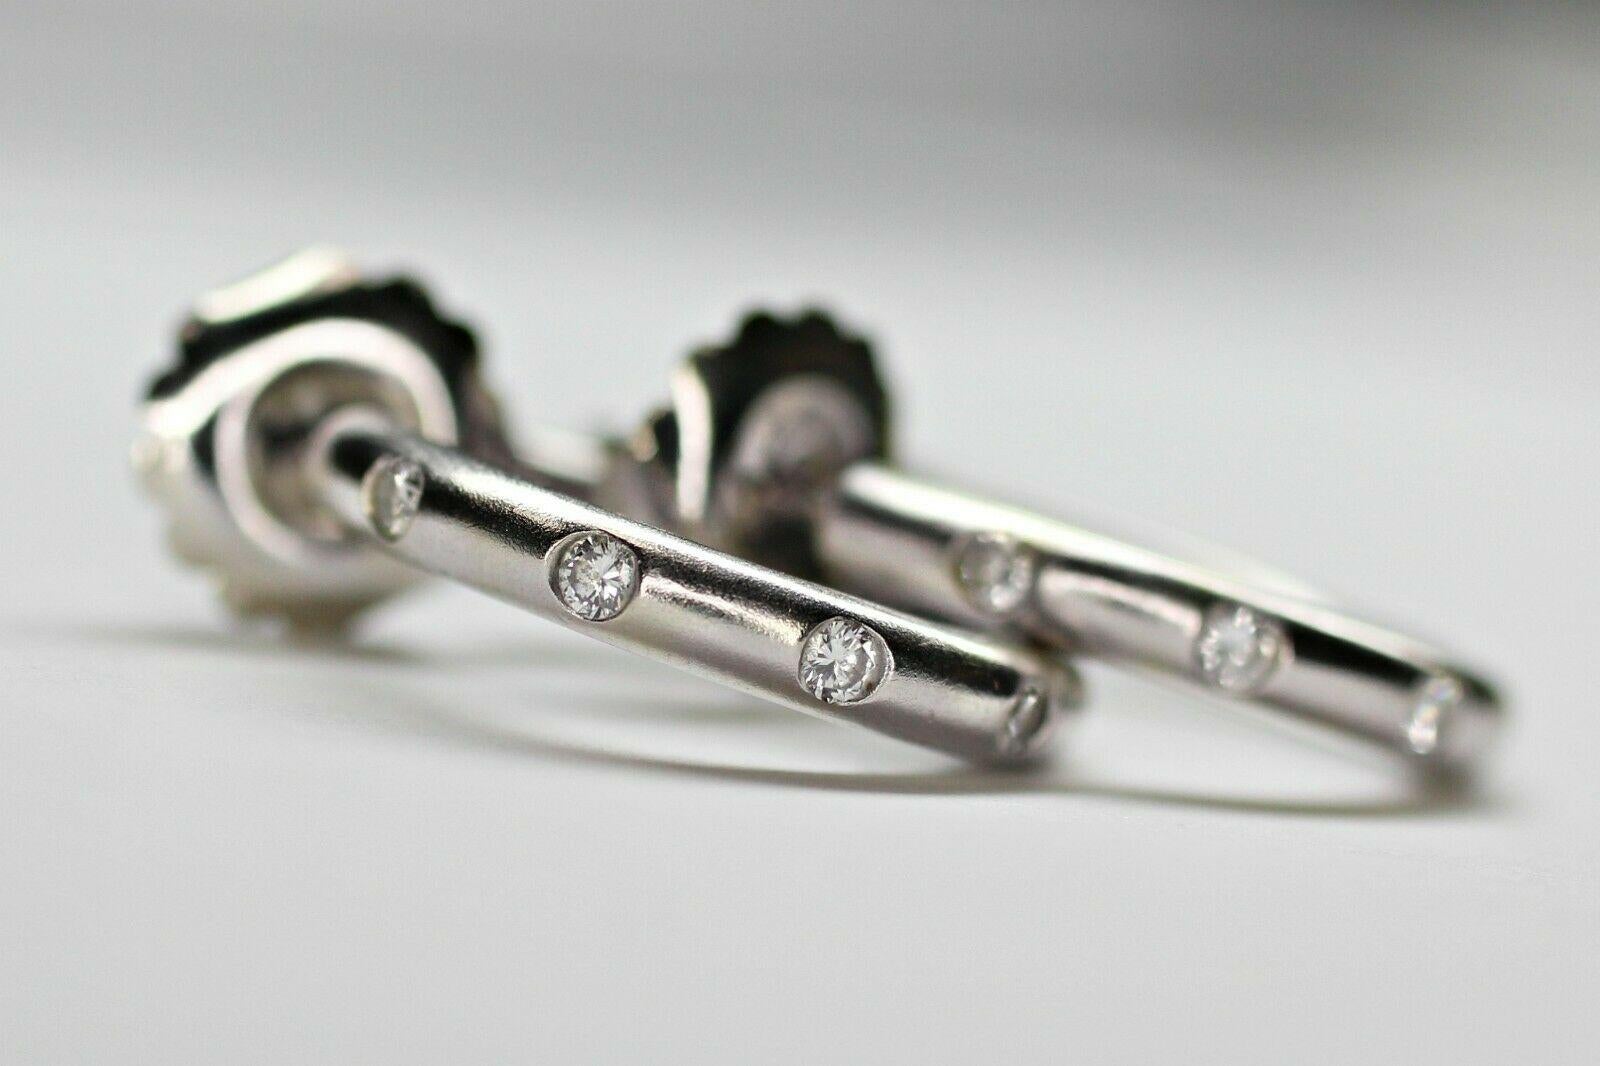 This is a 14k white gold diamond hoop earrings with approximately 0.34 carat total weight of round diamonds embedded symmetrically into the earrings with a sandblast finish. The earrings comes with tight jumbo push backings to keep them secure and